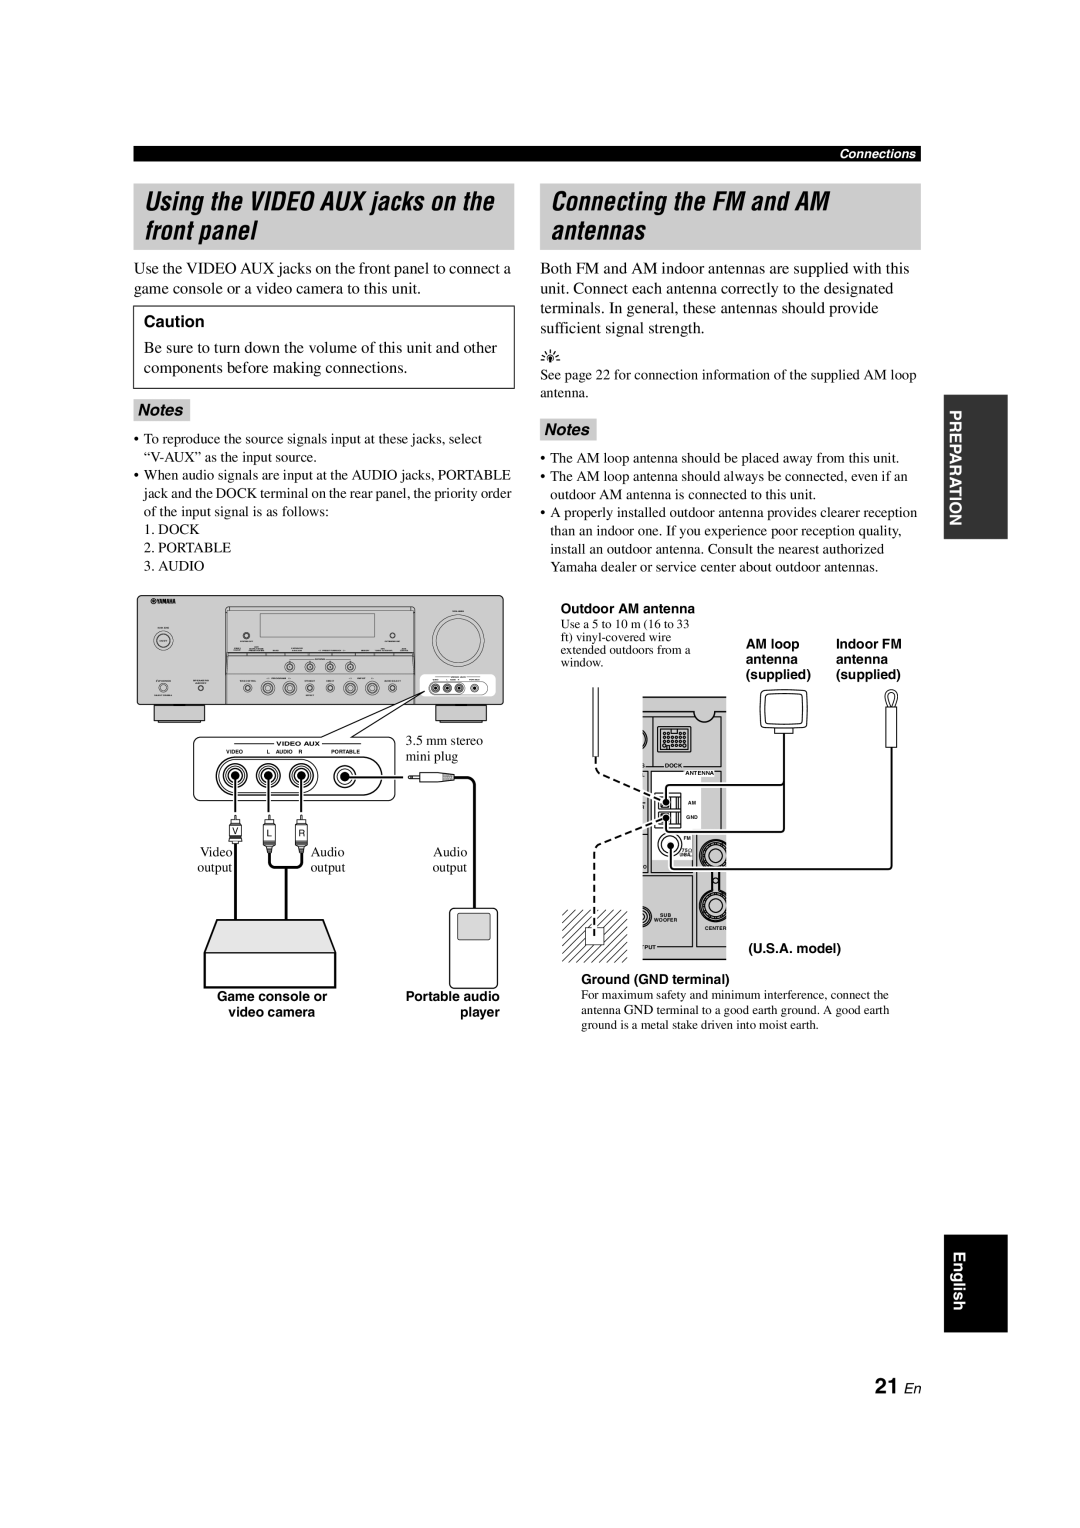 Yamaha RX-V563 owner manual Using the VIDEO AUX jacks on the front panel, Connecting the FM and AM antennas, 21 En 